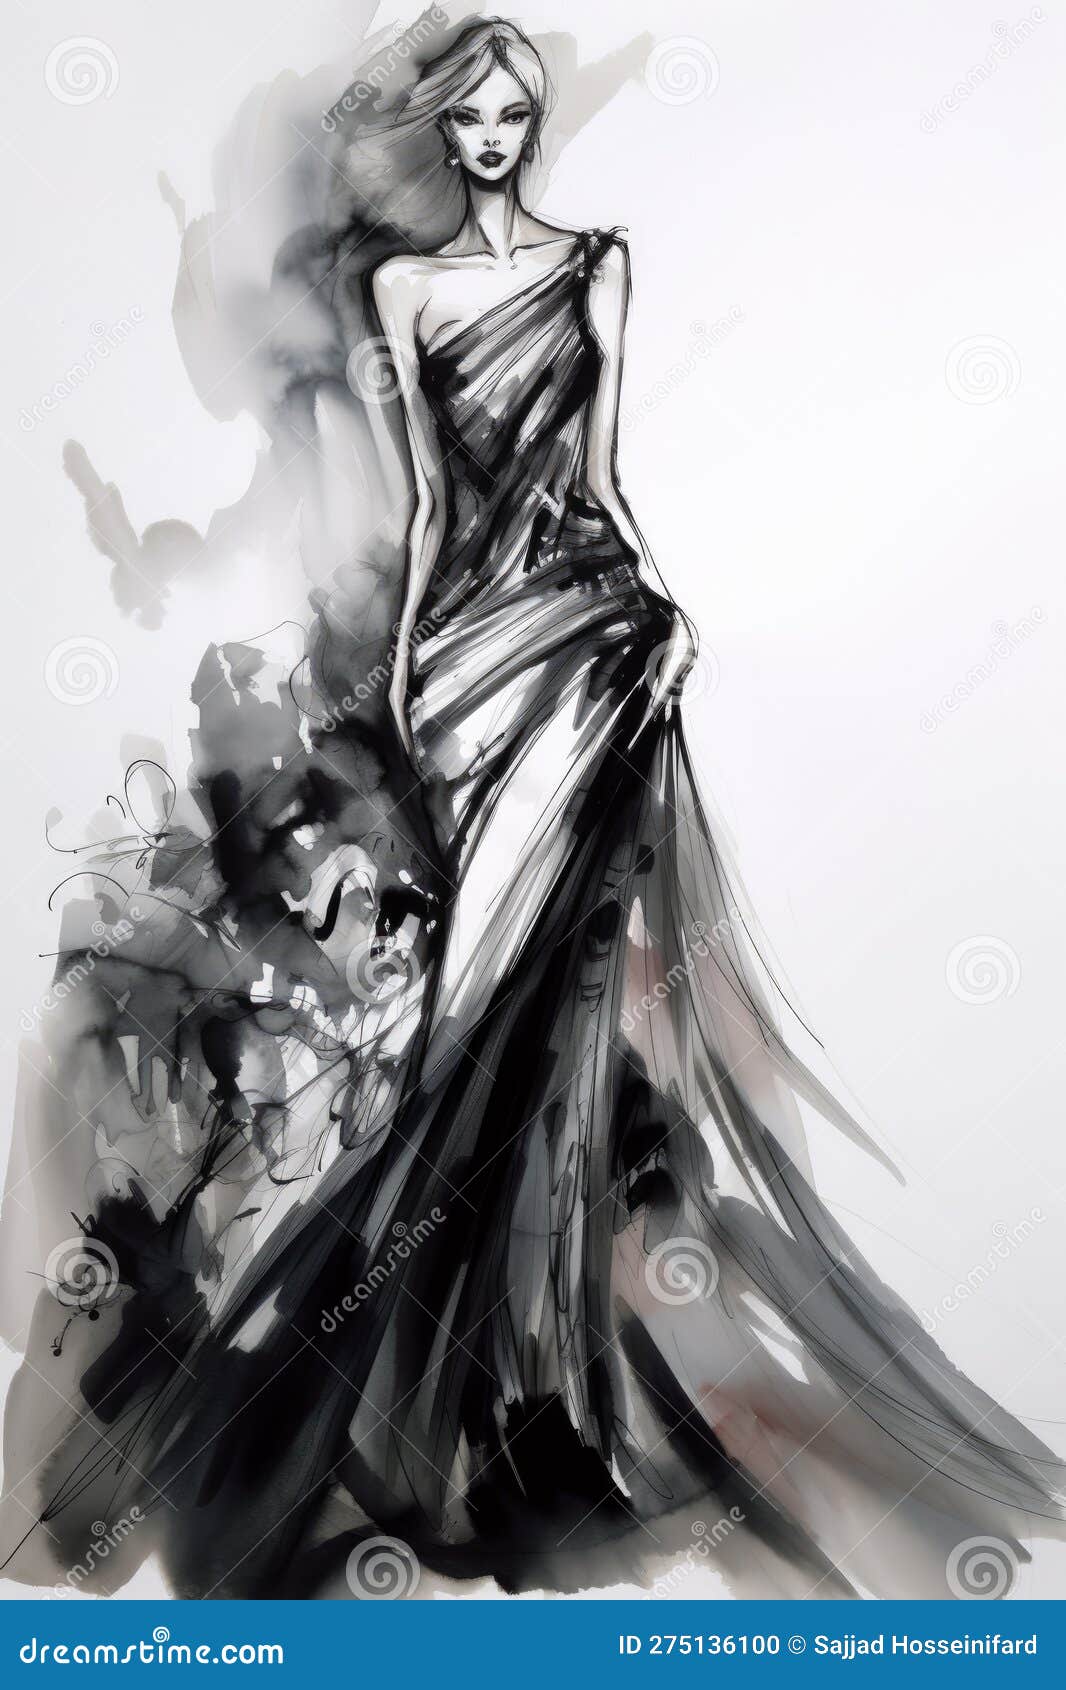 Fashion sketch vector stylish woman drawing Fashion woman sketch vector  illustration stylish woman in modern dress and  CanStock